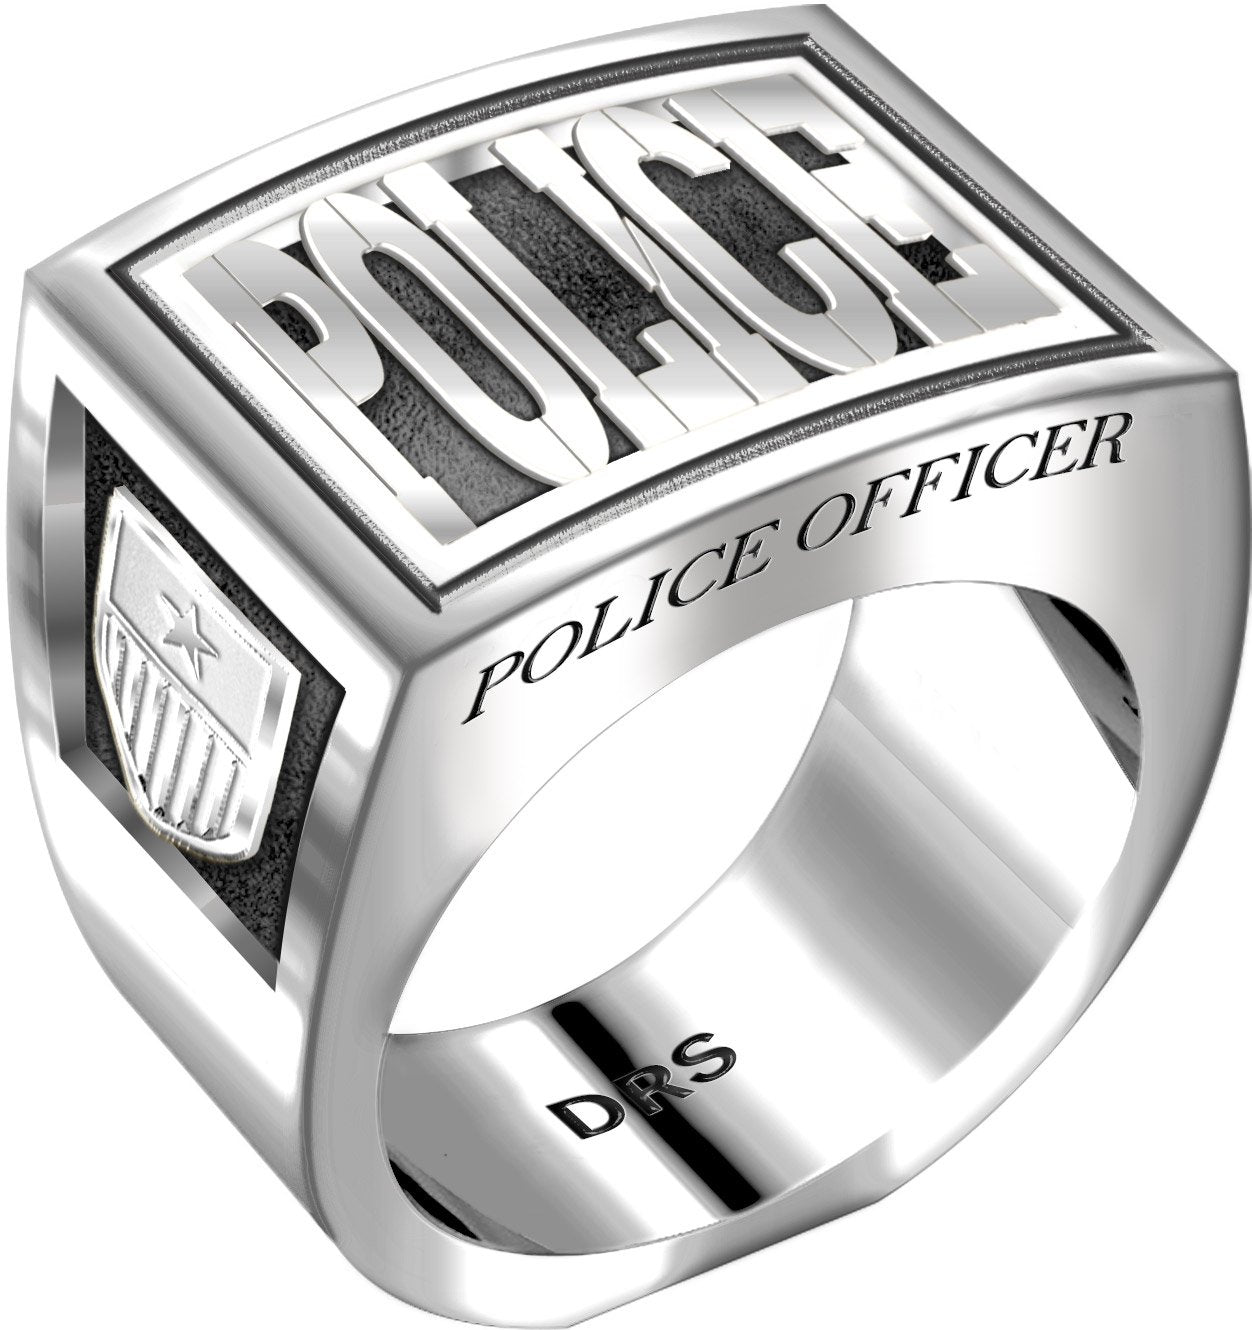 Men's Heavy 0.925 Sterling Silver Police Officer Ring Band